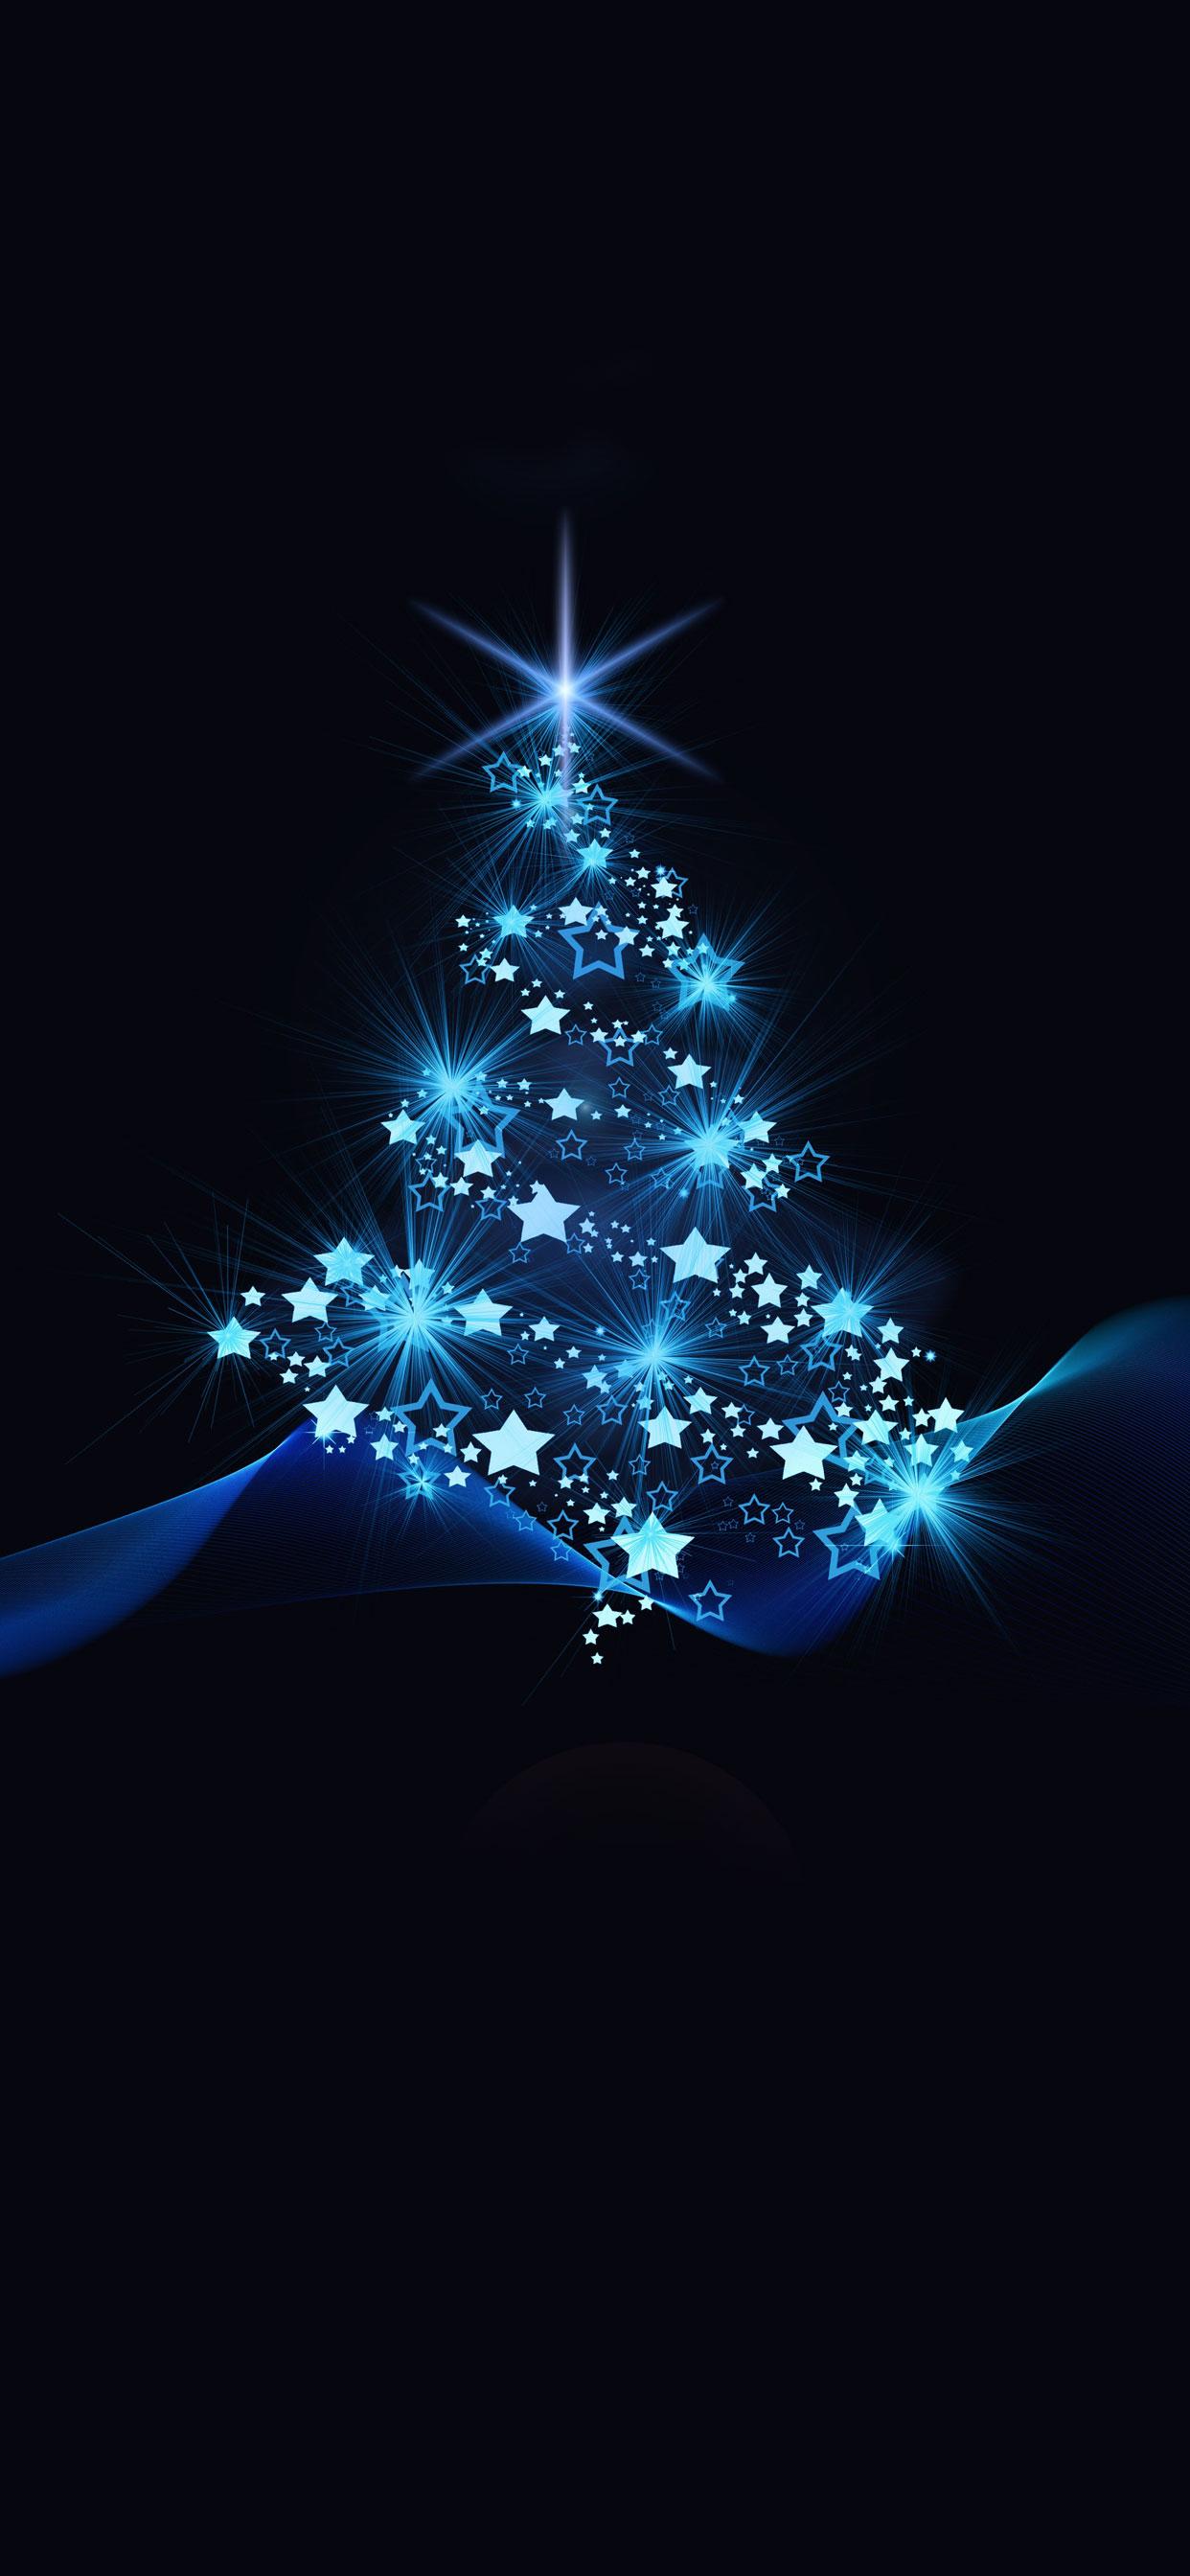 40 Beautiful iPhone 11 Pro Max Christmas Wallpapers & Backgrounds